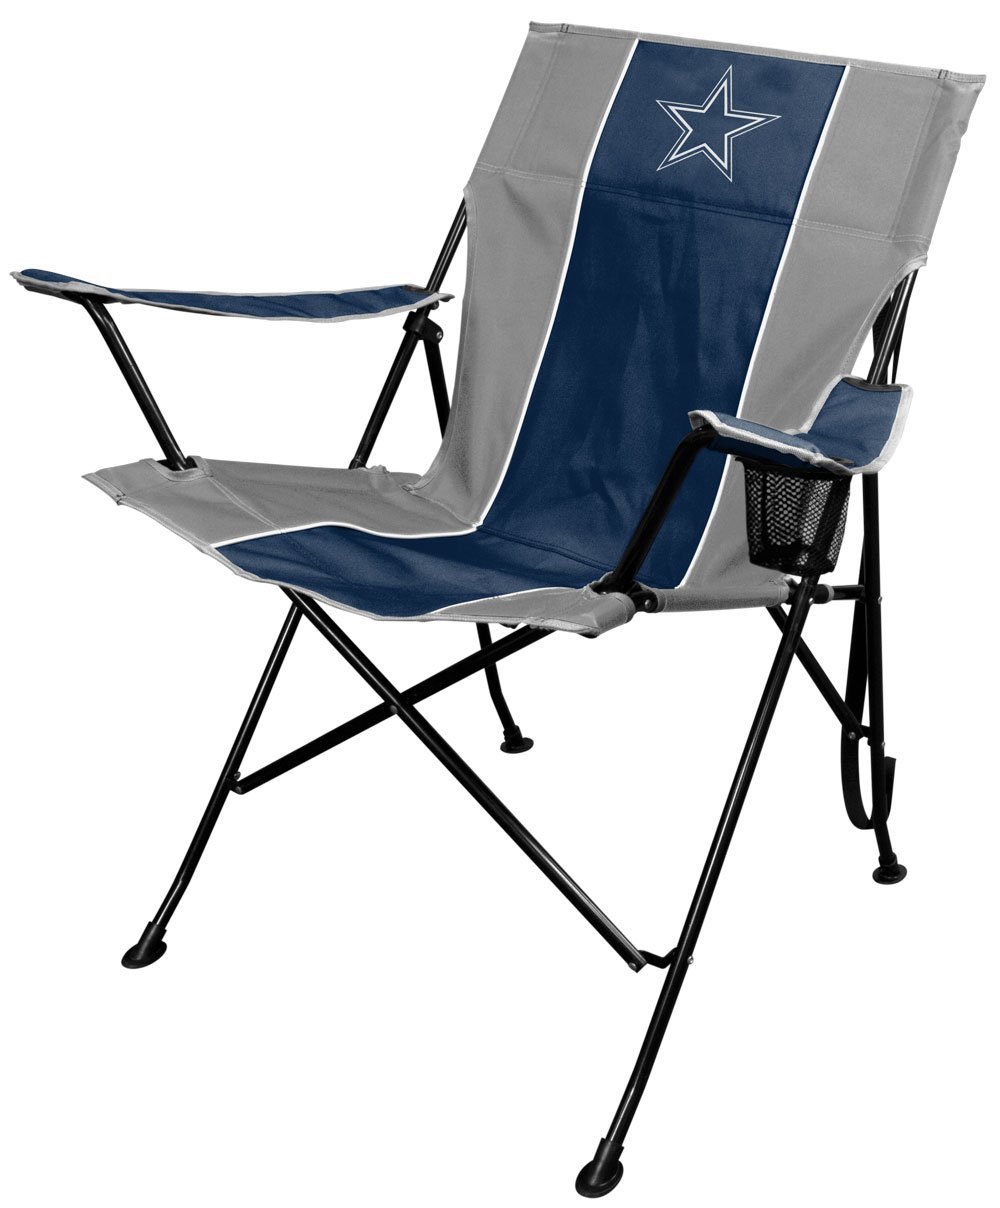 25% Off Rawlings NFL and NCAA Tailgate Chairs – Just $22.49!